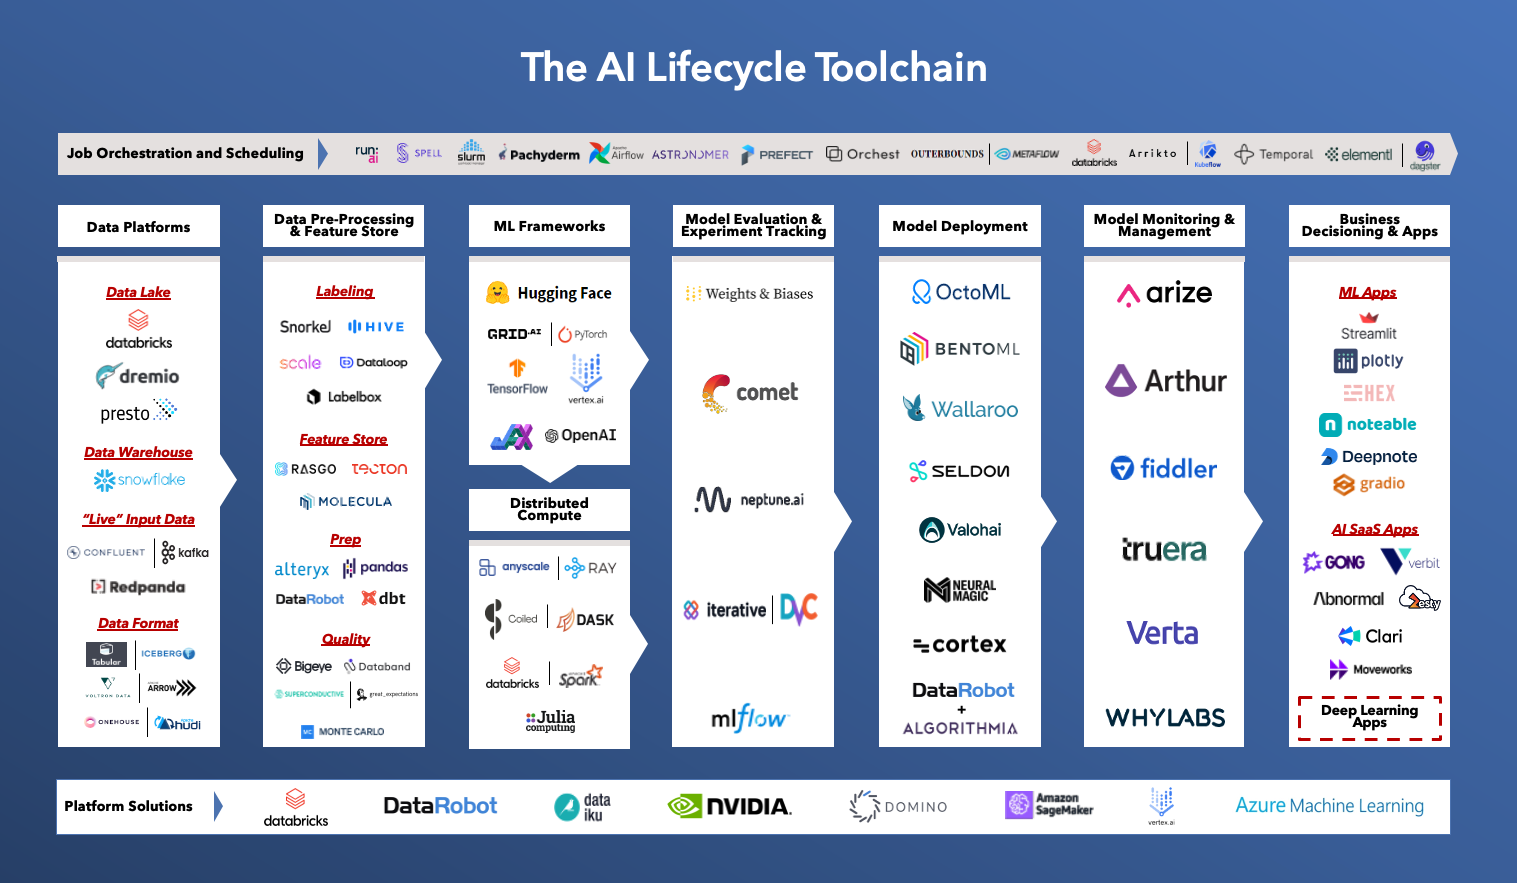 The AI Lifecycle Toolchain Market Map